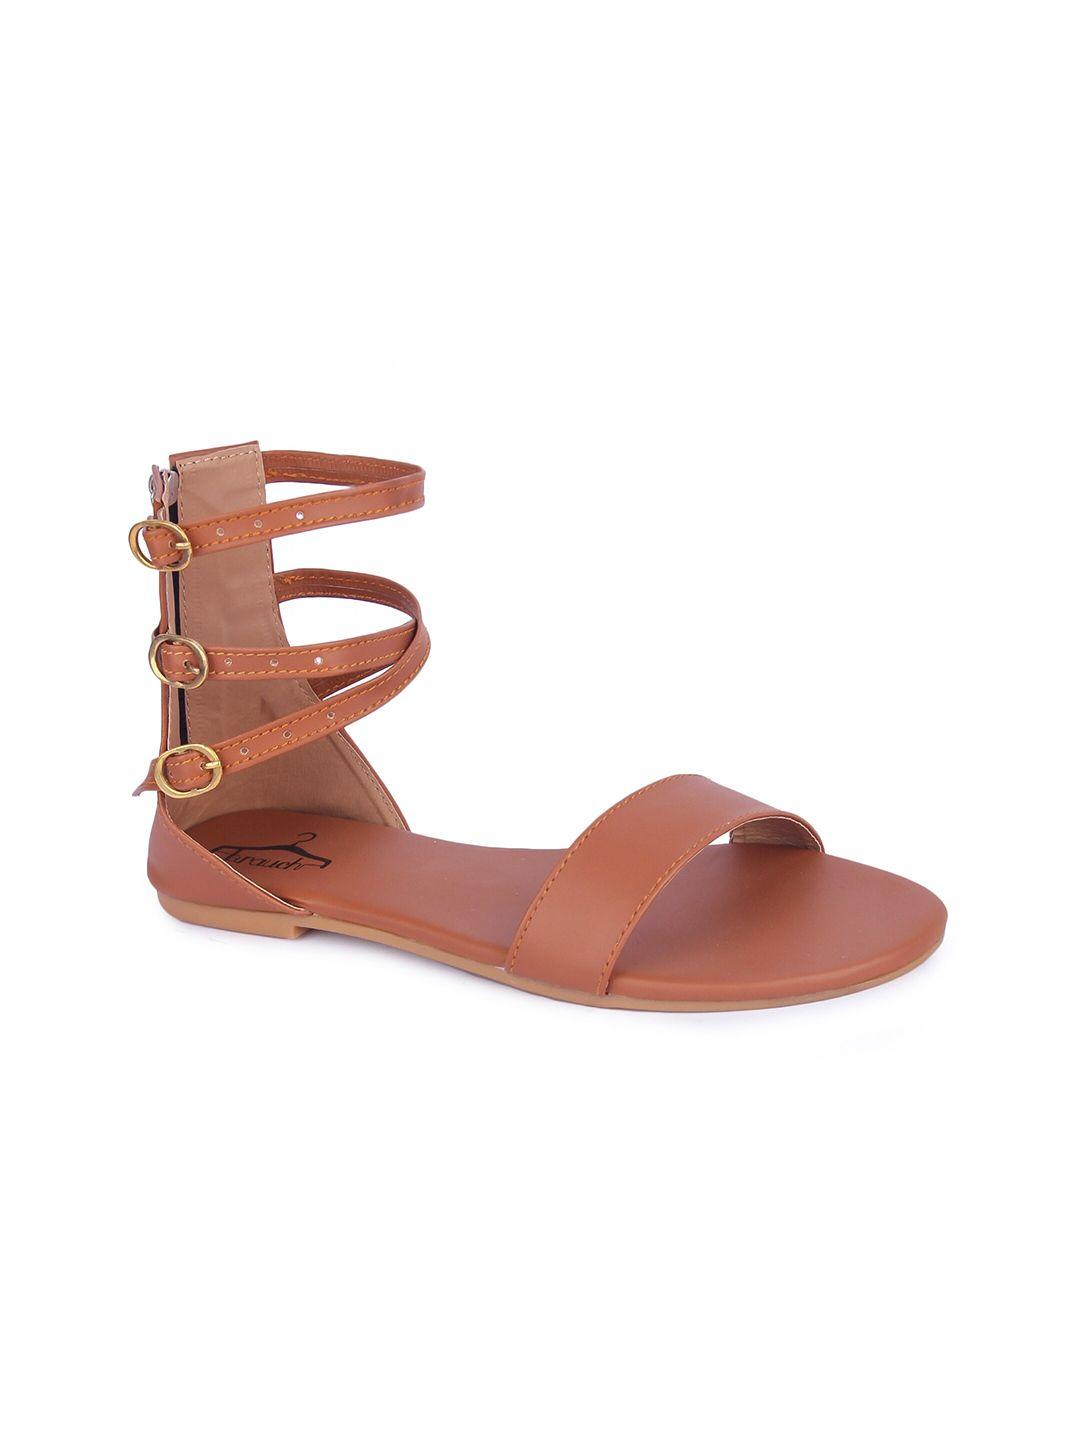 brauch-women-brown-gladiators-with-buckles-flats